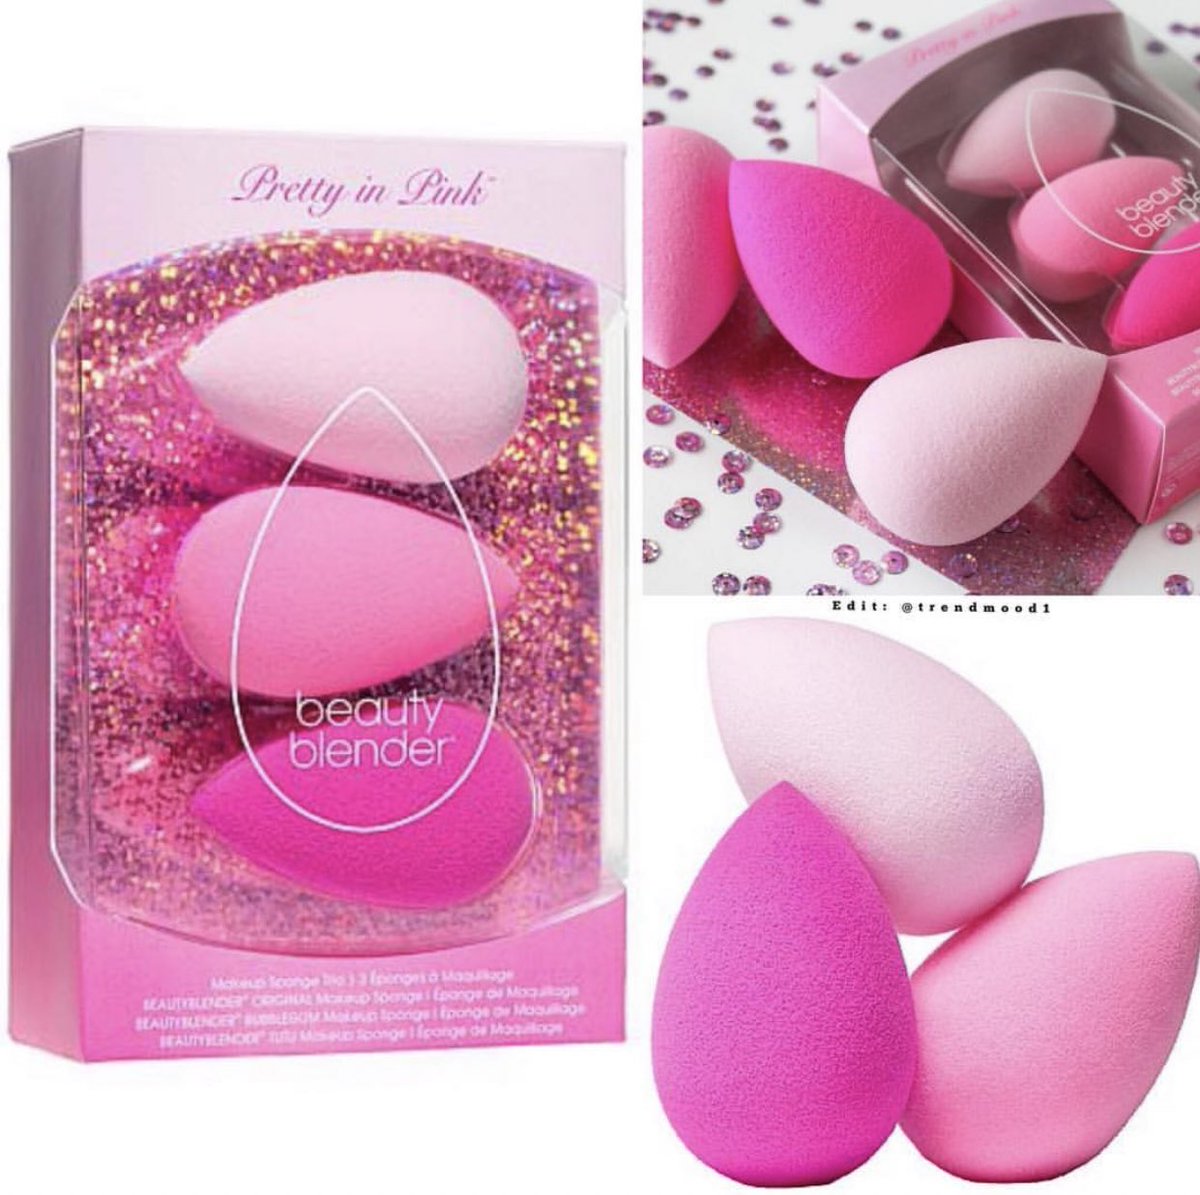 Trendmood on Twitter: "Available Now! 🚨 LINK ➡️ https://t.co/X9QMjeYGzL @hsn NEW! A Fun Set all #PINK 💕💸 @beautyblender Great value: 3-piece Pretty in Pink Set $45: Original pink beautyblender Bubble Gum